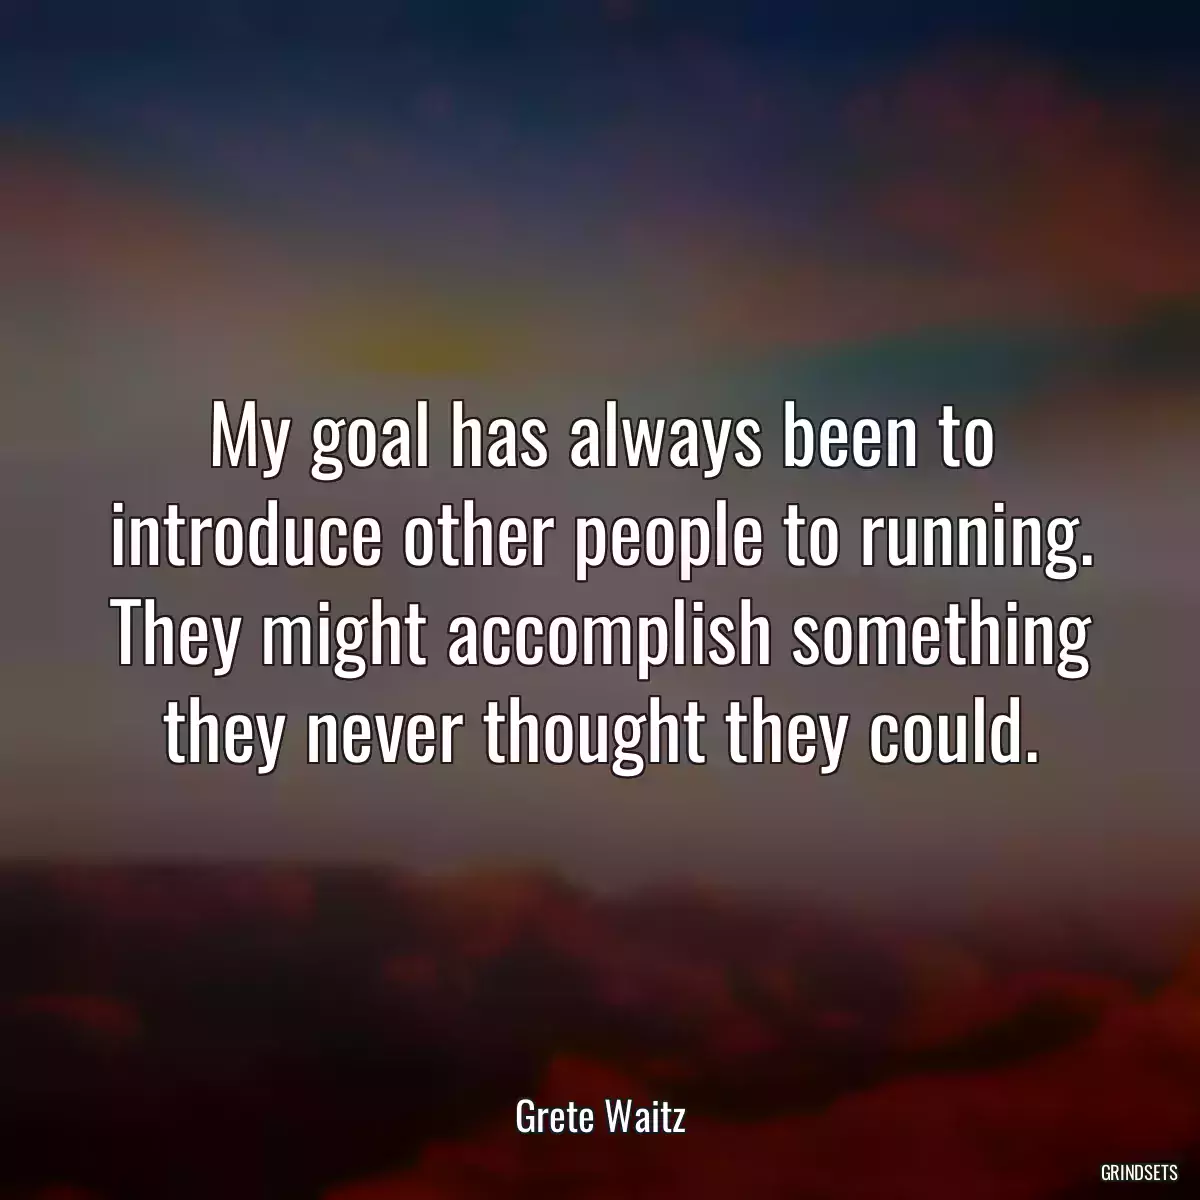 My goal has always been to introduce other people to running. They might accomplish something they never thought they could.